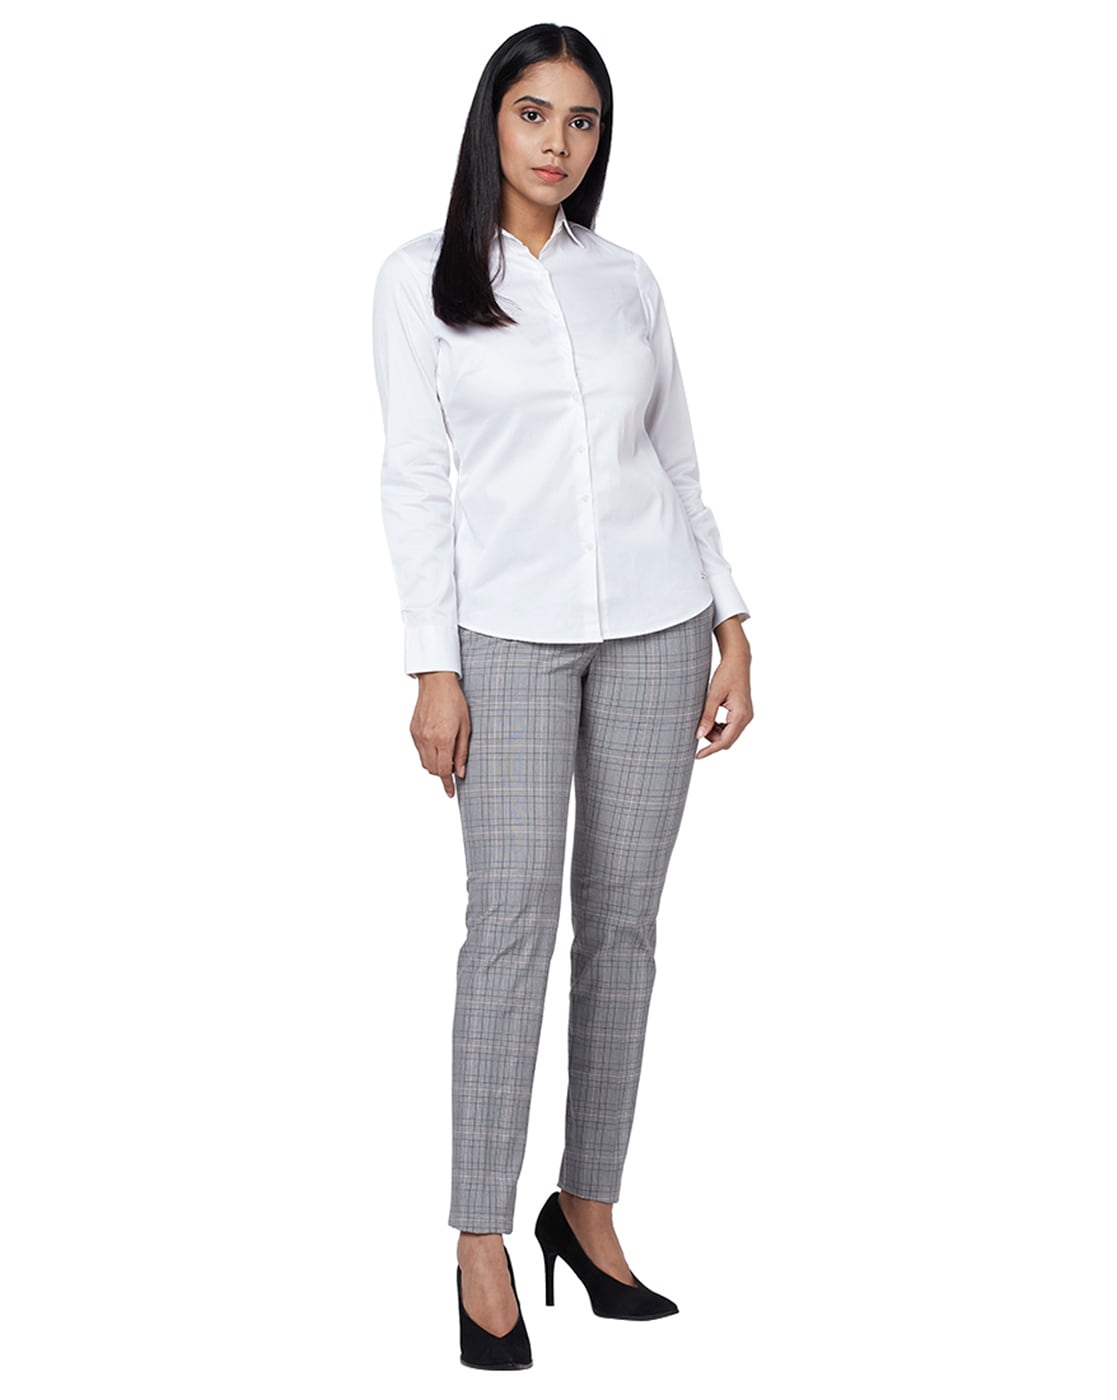 What To Wear With Grey Pants At Work  Womens fashion casual outfits  Fashion Womens fashion casual chic